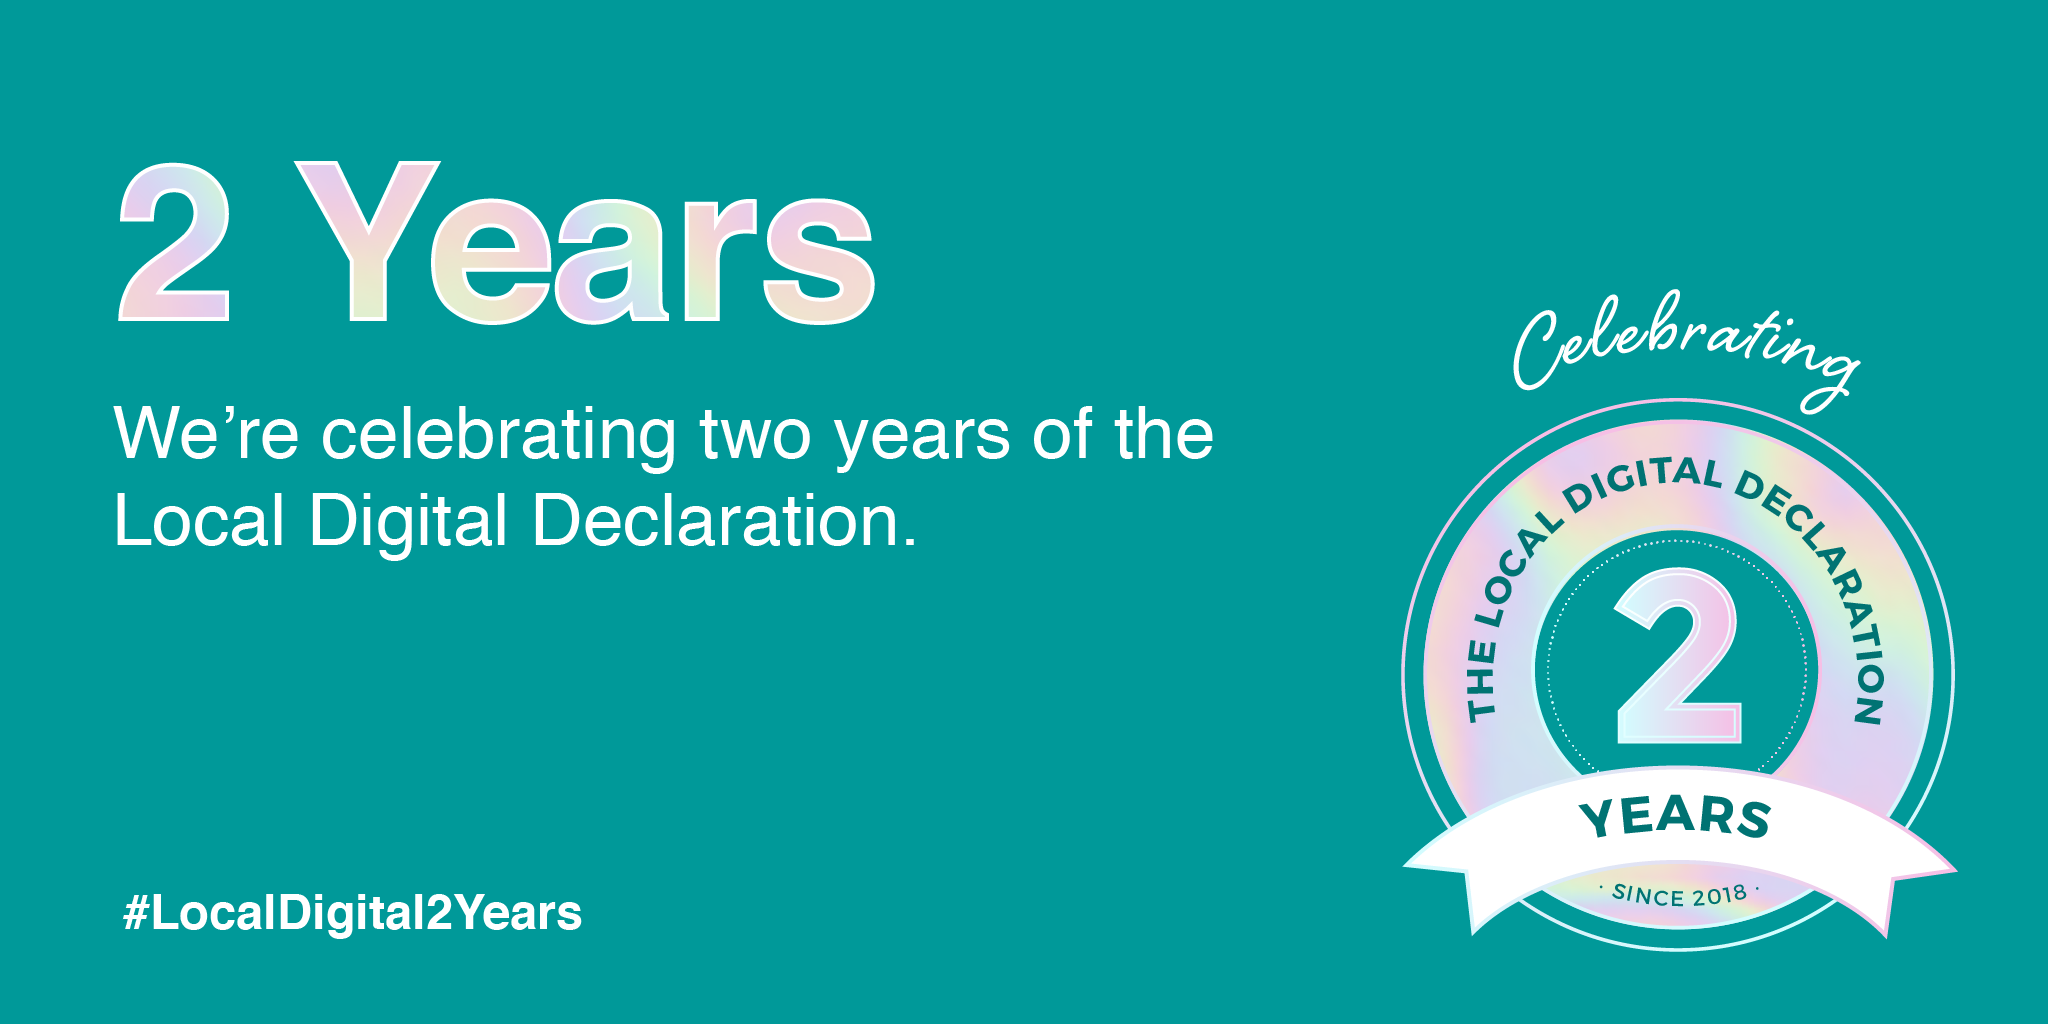 A graphic that was made to celebrate 2 years of the Local Digital Declaration